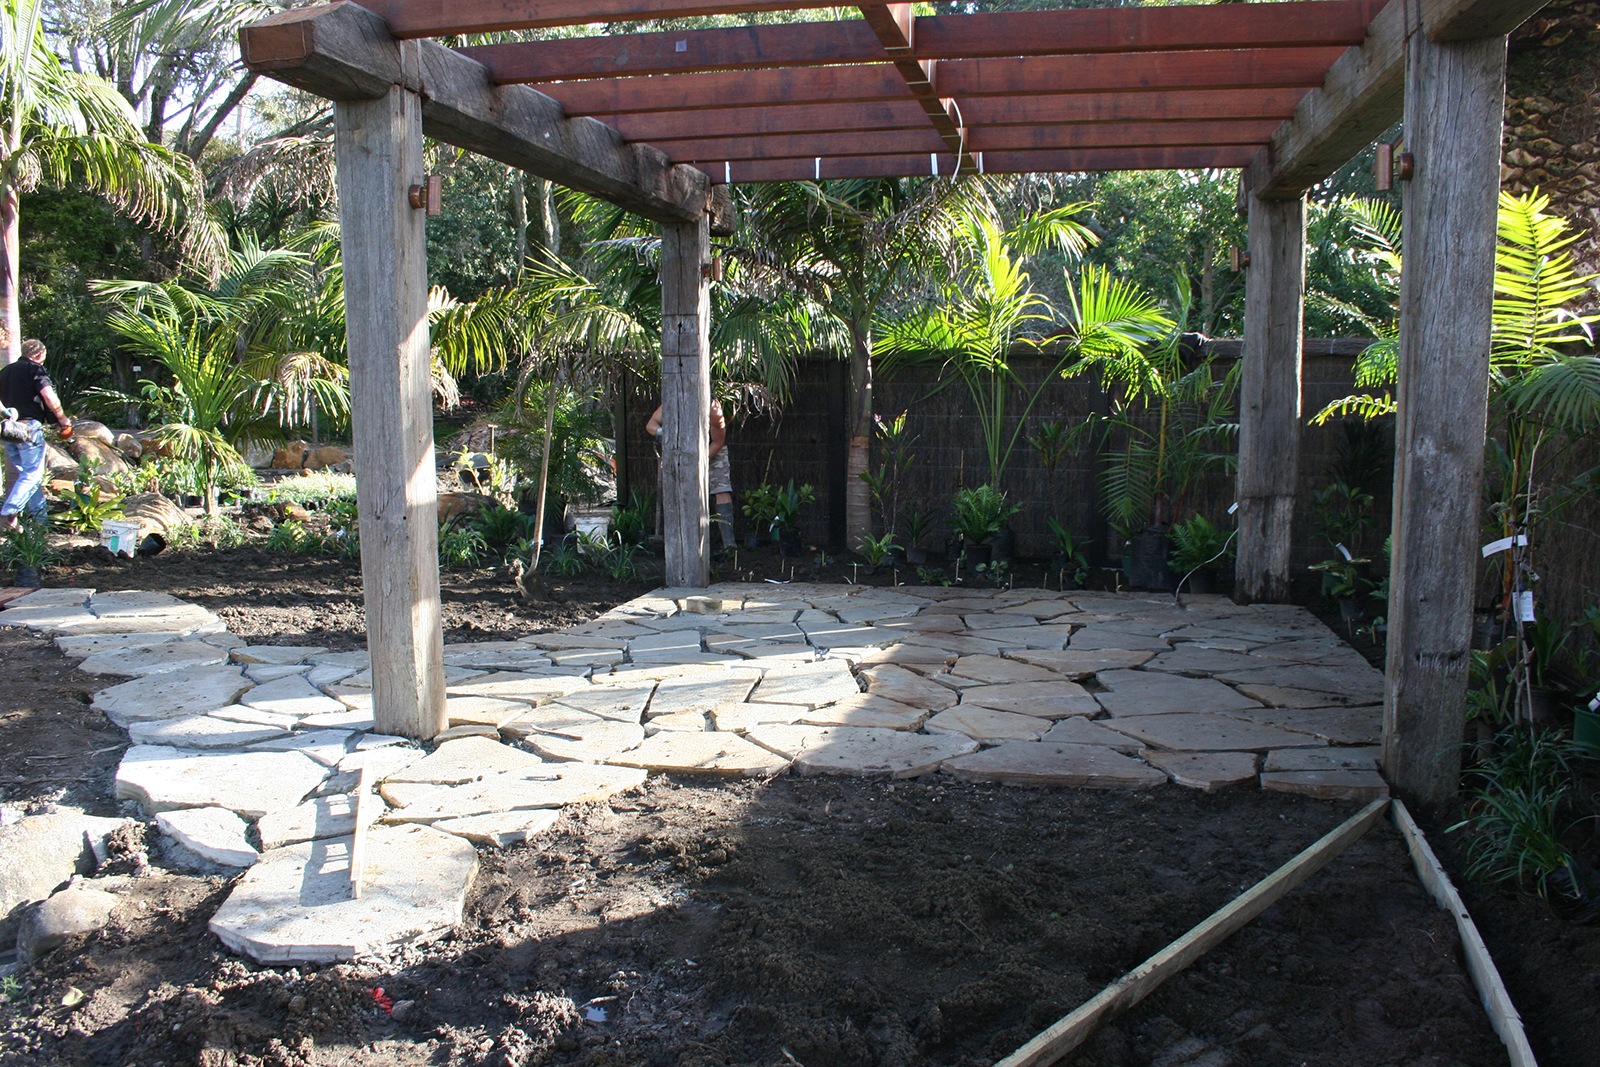 laying down the outdoor seating area stones